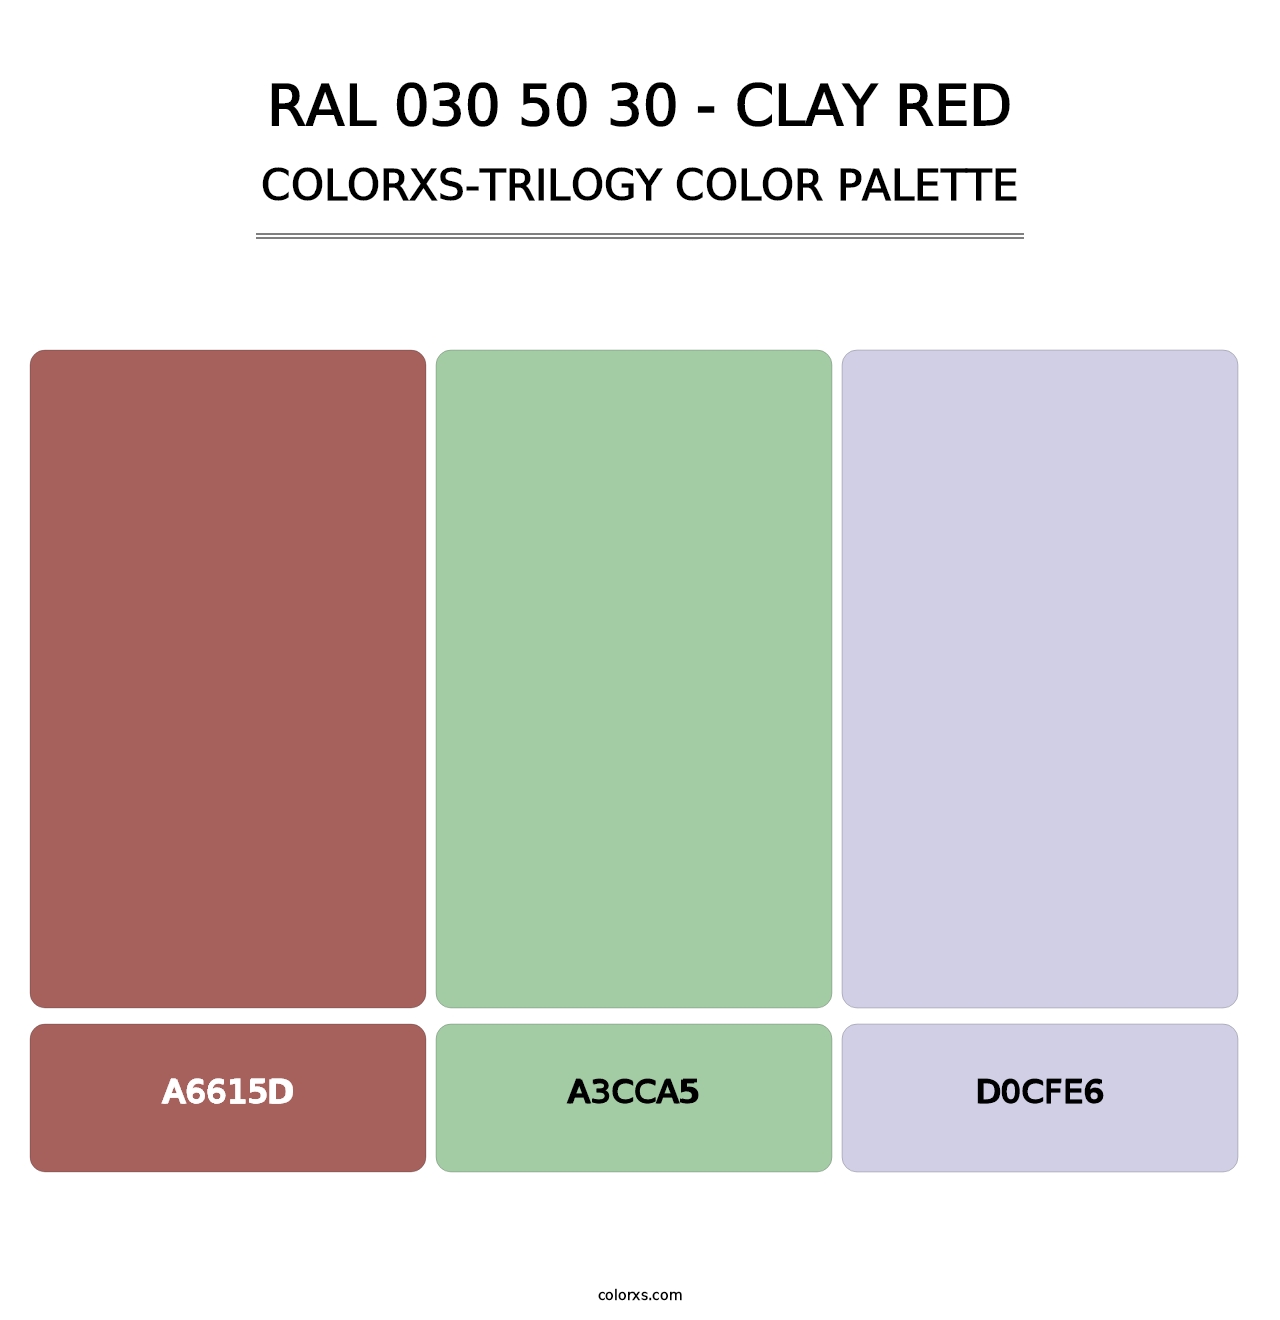 RAL 030 50 30 - Clay Red - Colorxs Trilogy Palette